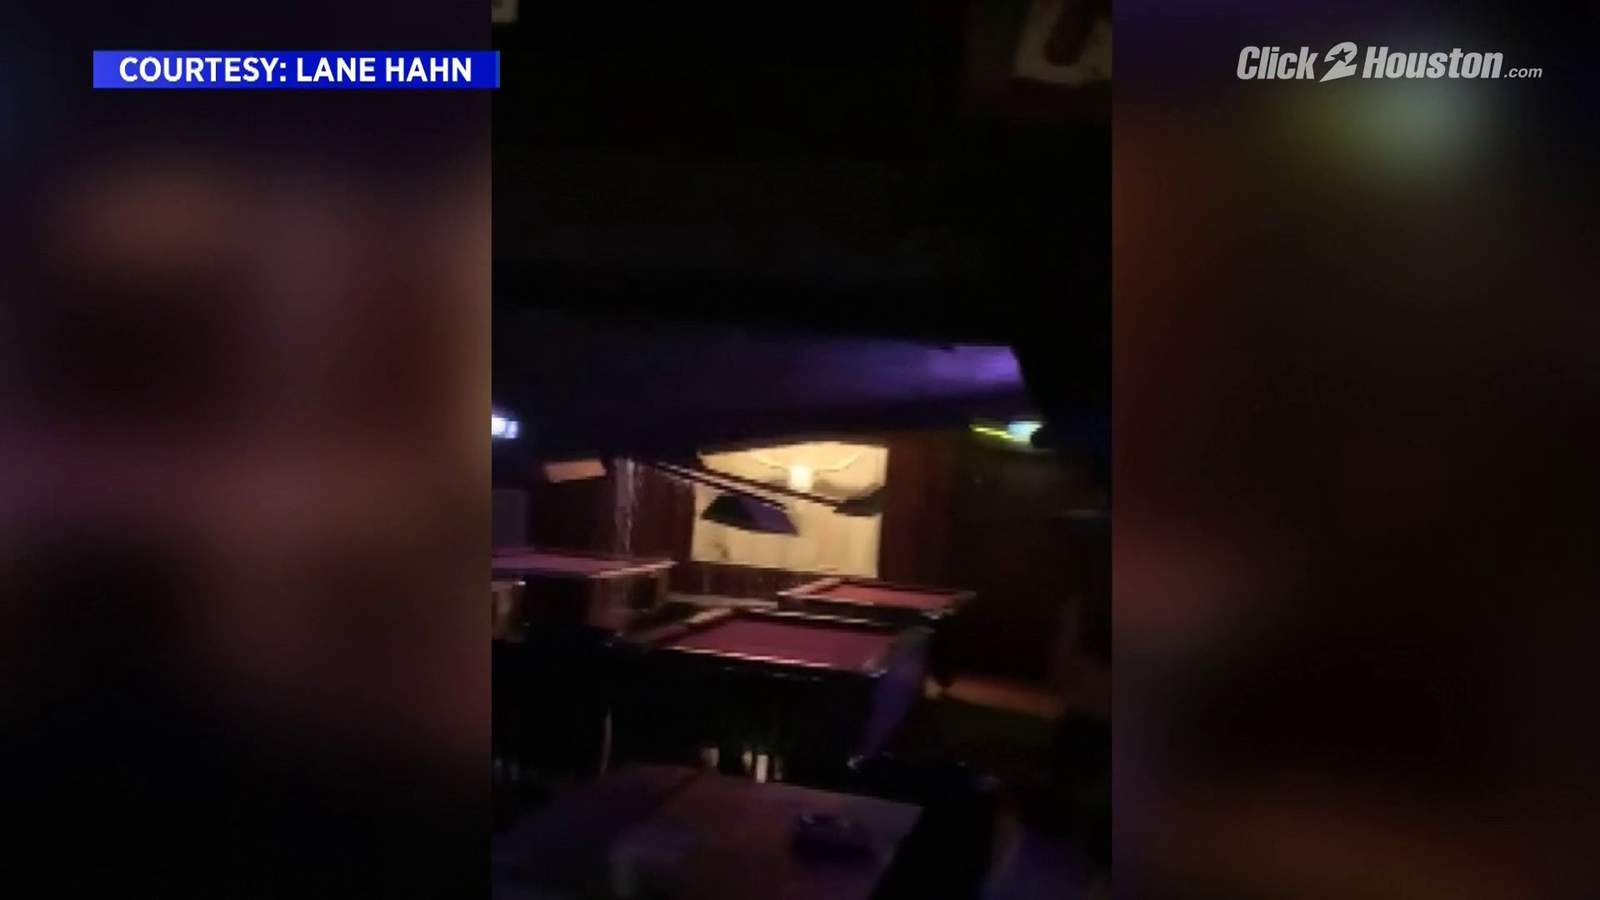 WATCH: Roof of historic The Dixie Chicken bar in College Station collapses after heavy wind, hail damage